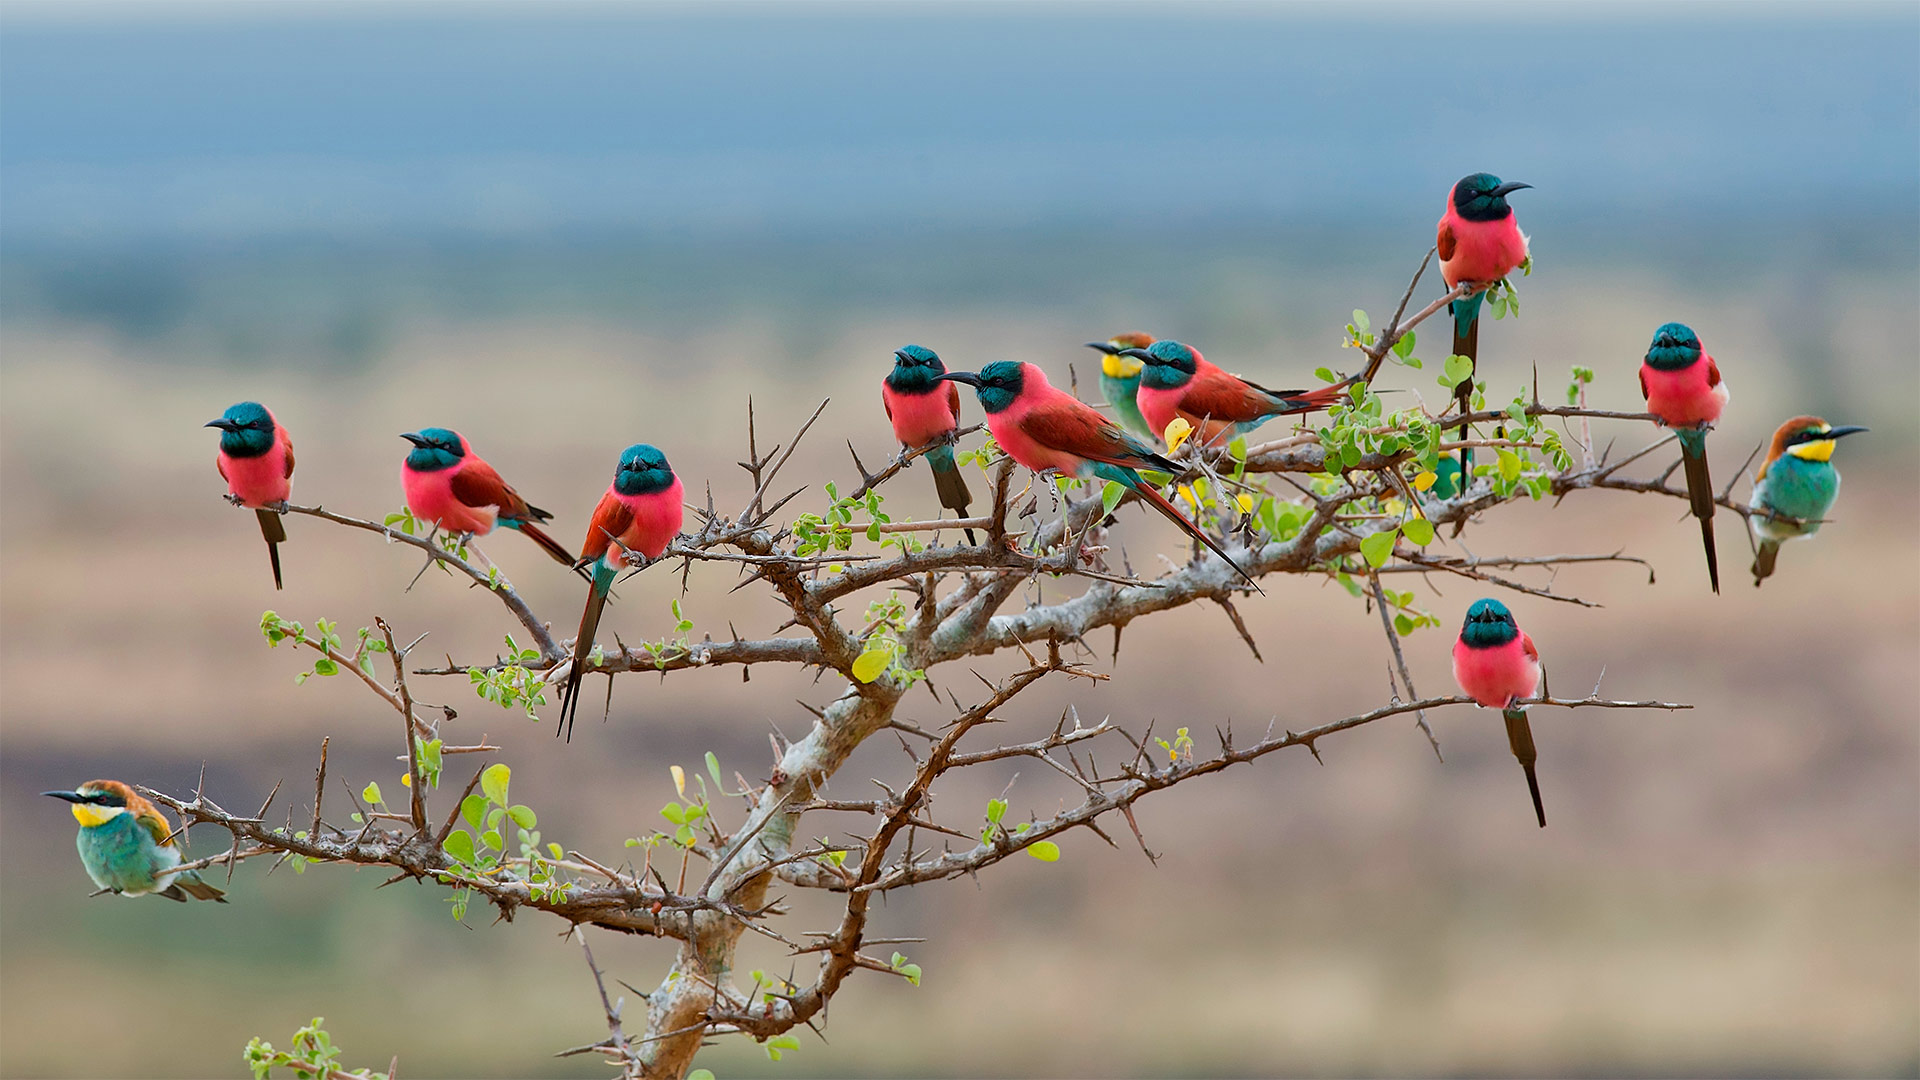 Northern carmine and European bee-eaters in Mkomazi National Park, Tanzania - webguzs/Getty Images)